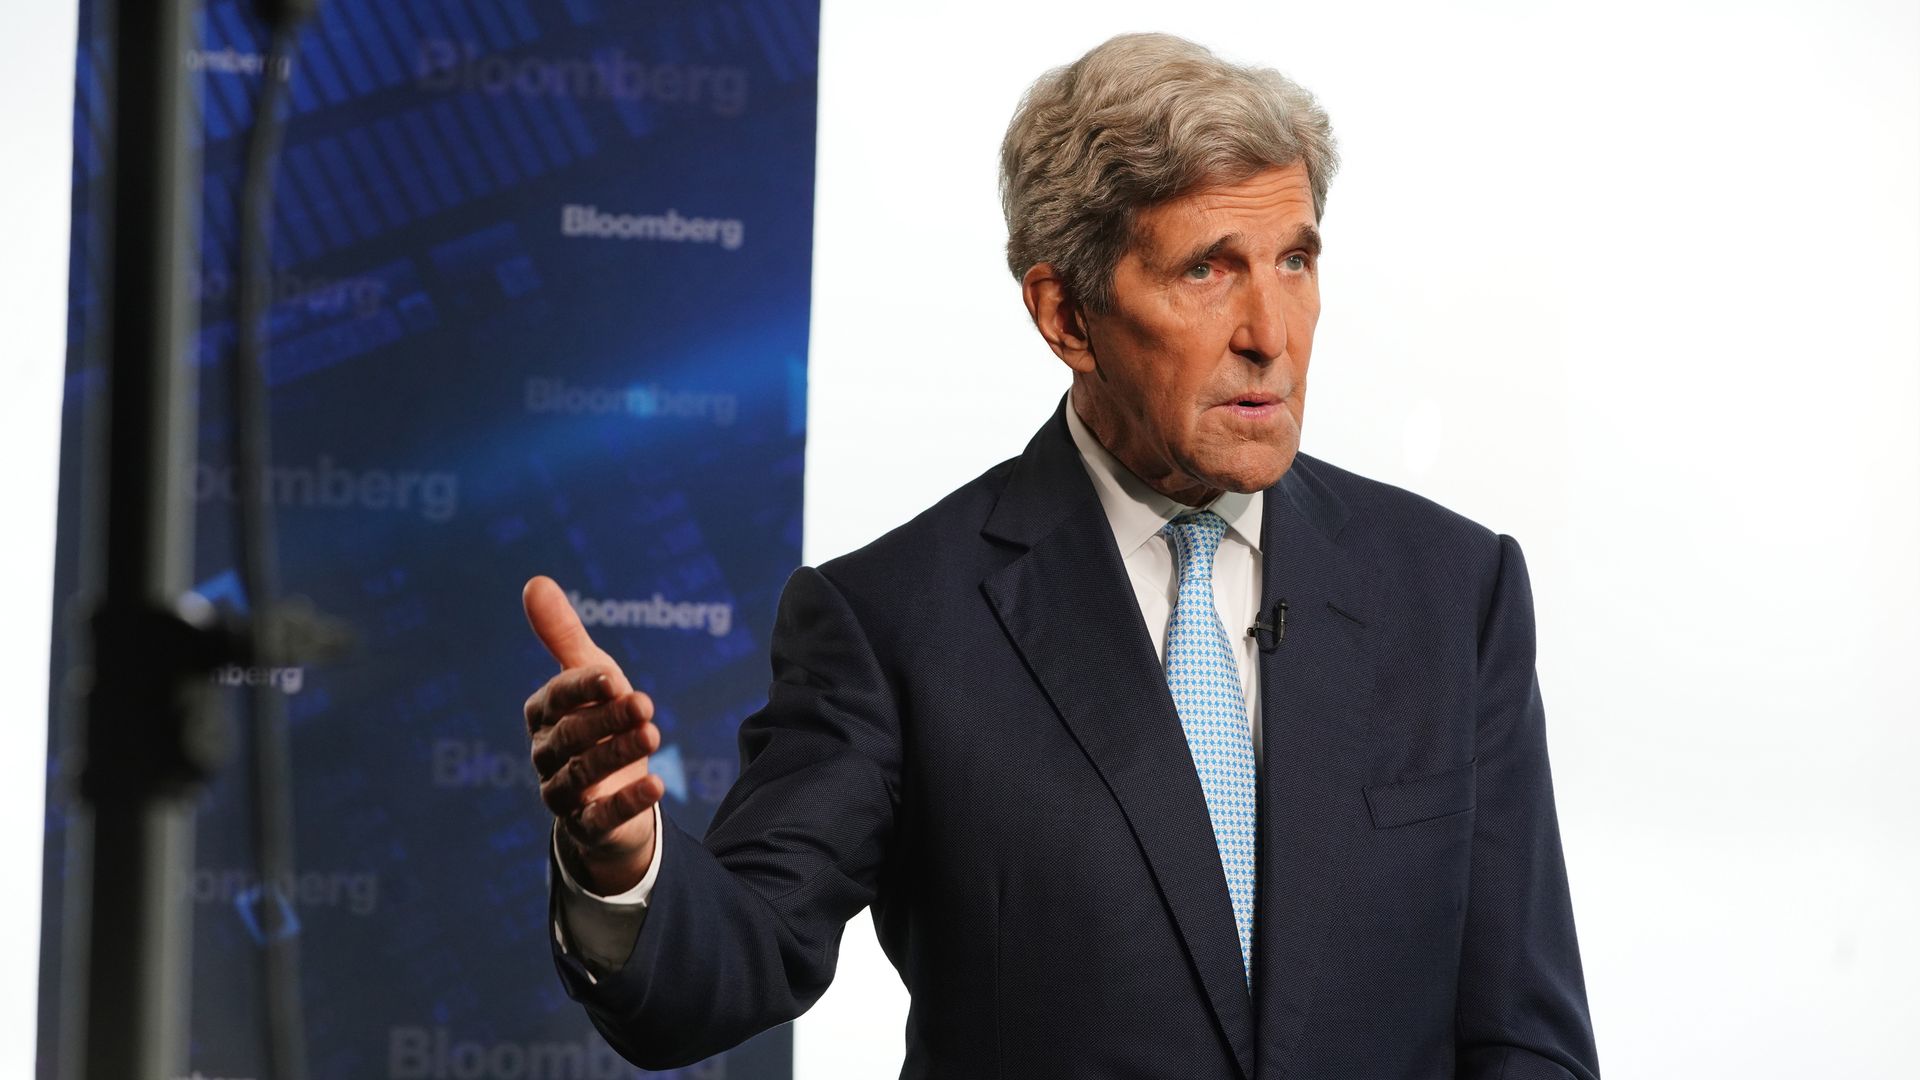 U.S. climate envoy John Kerry during an interview in New York City in September 2021.